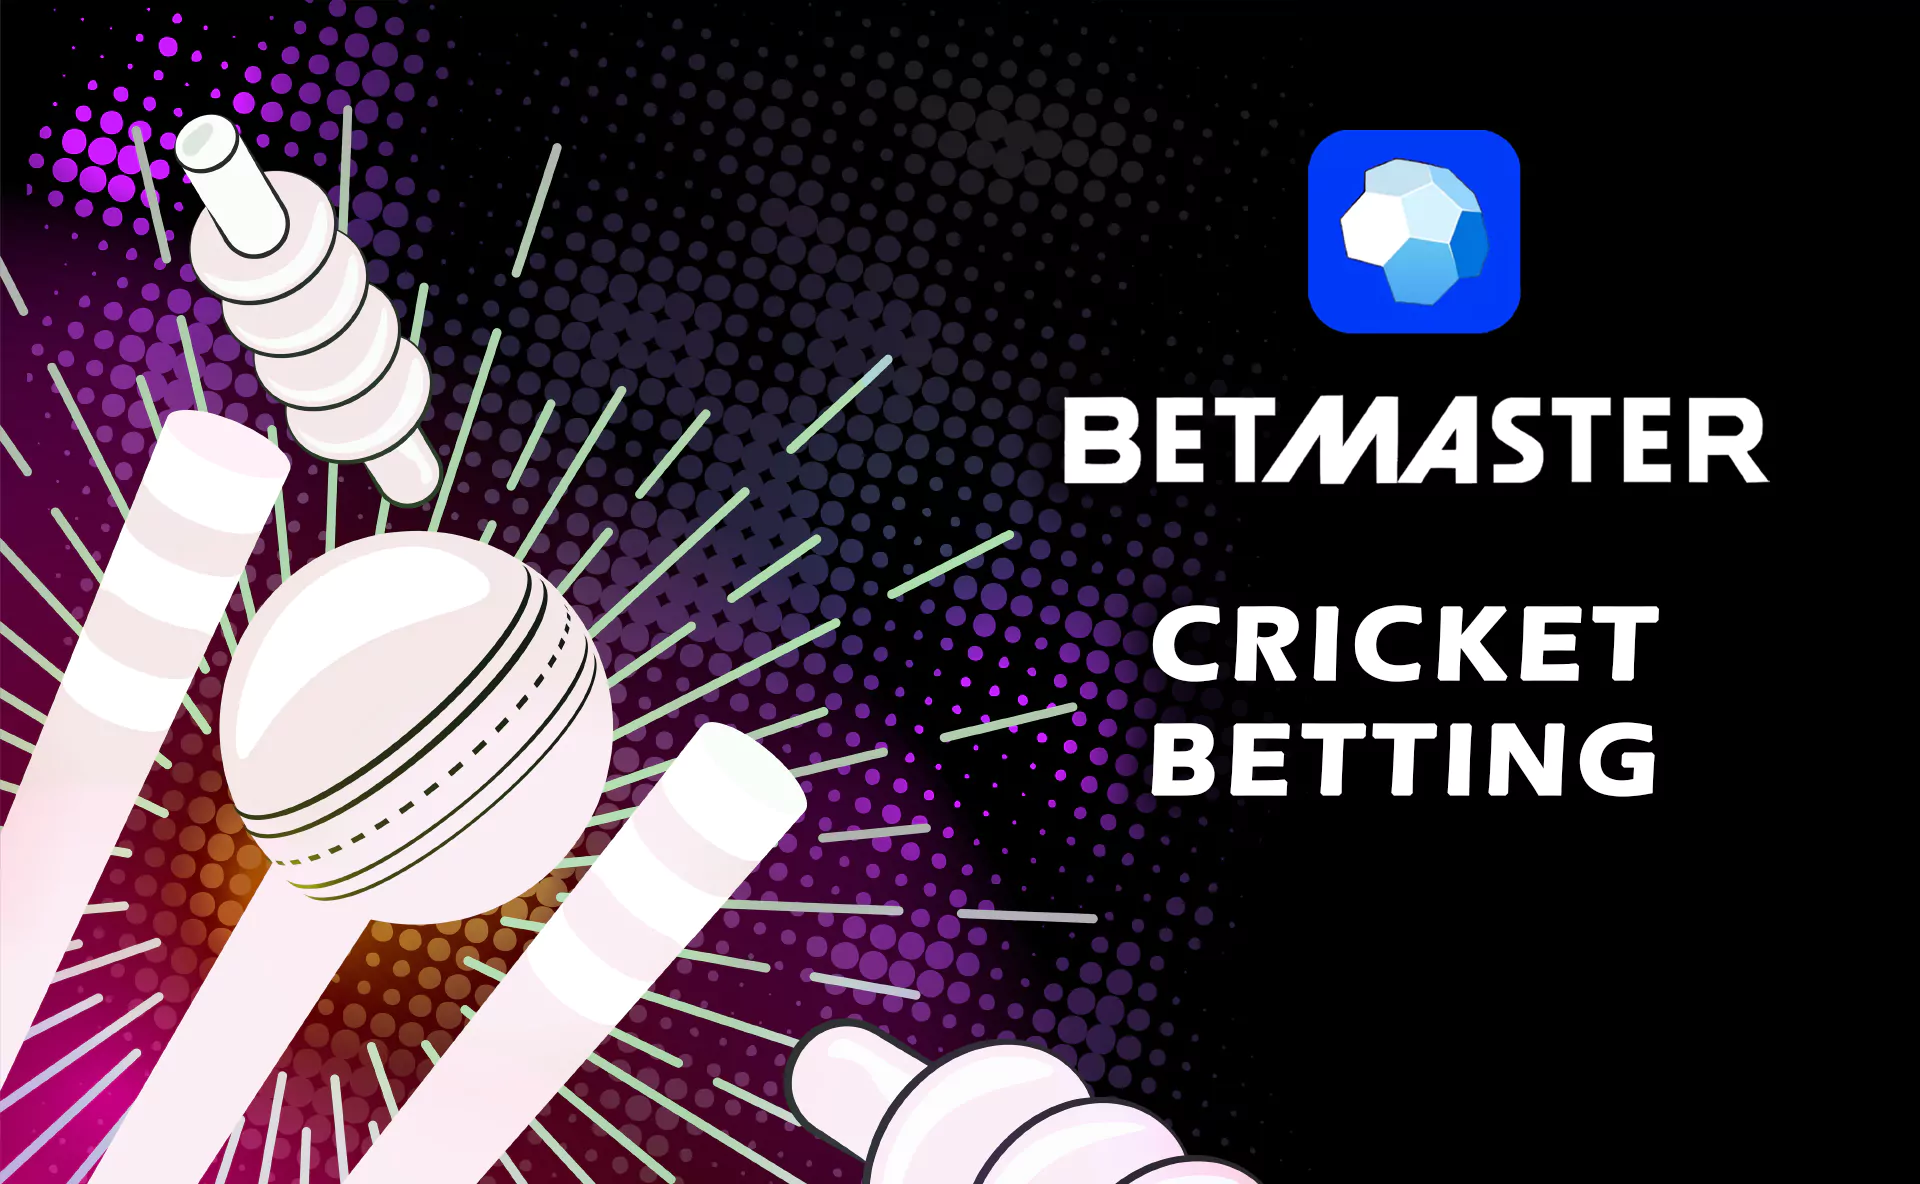 On Betmaster you can place bets on cricket events as well.